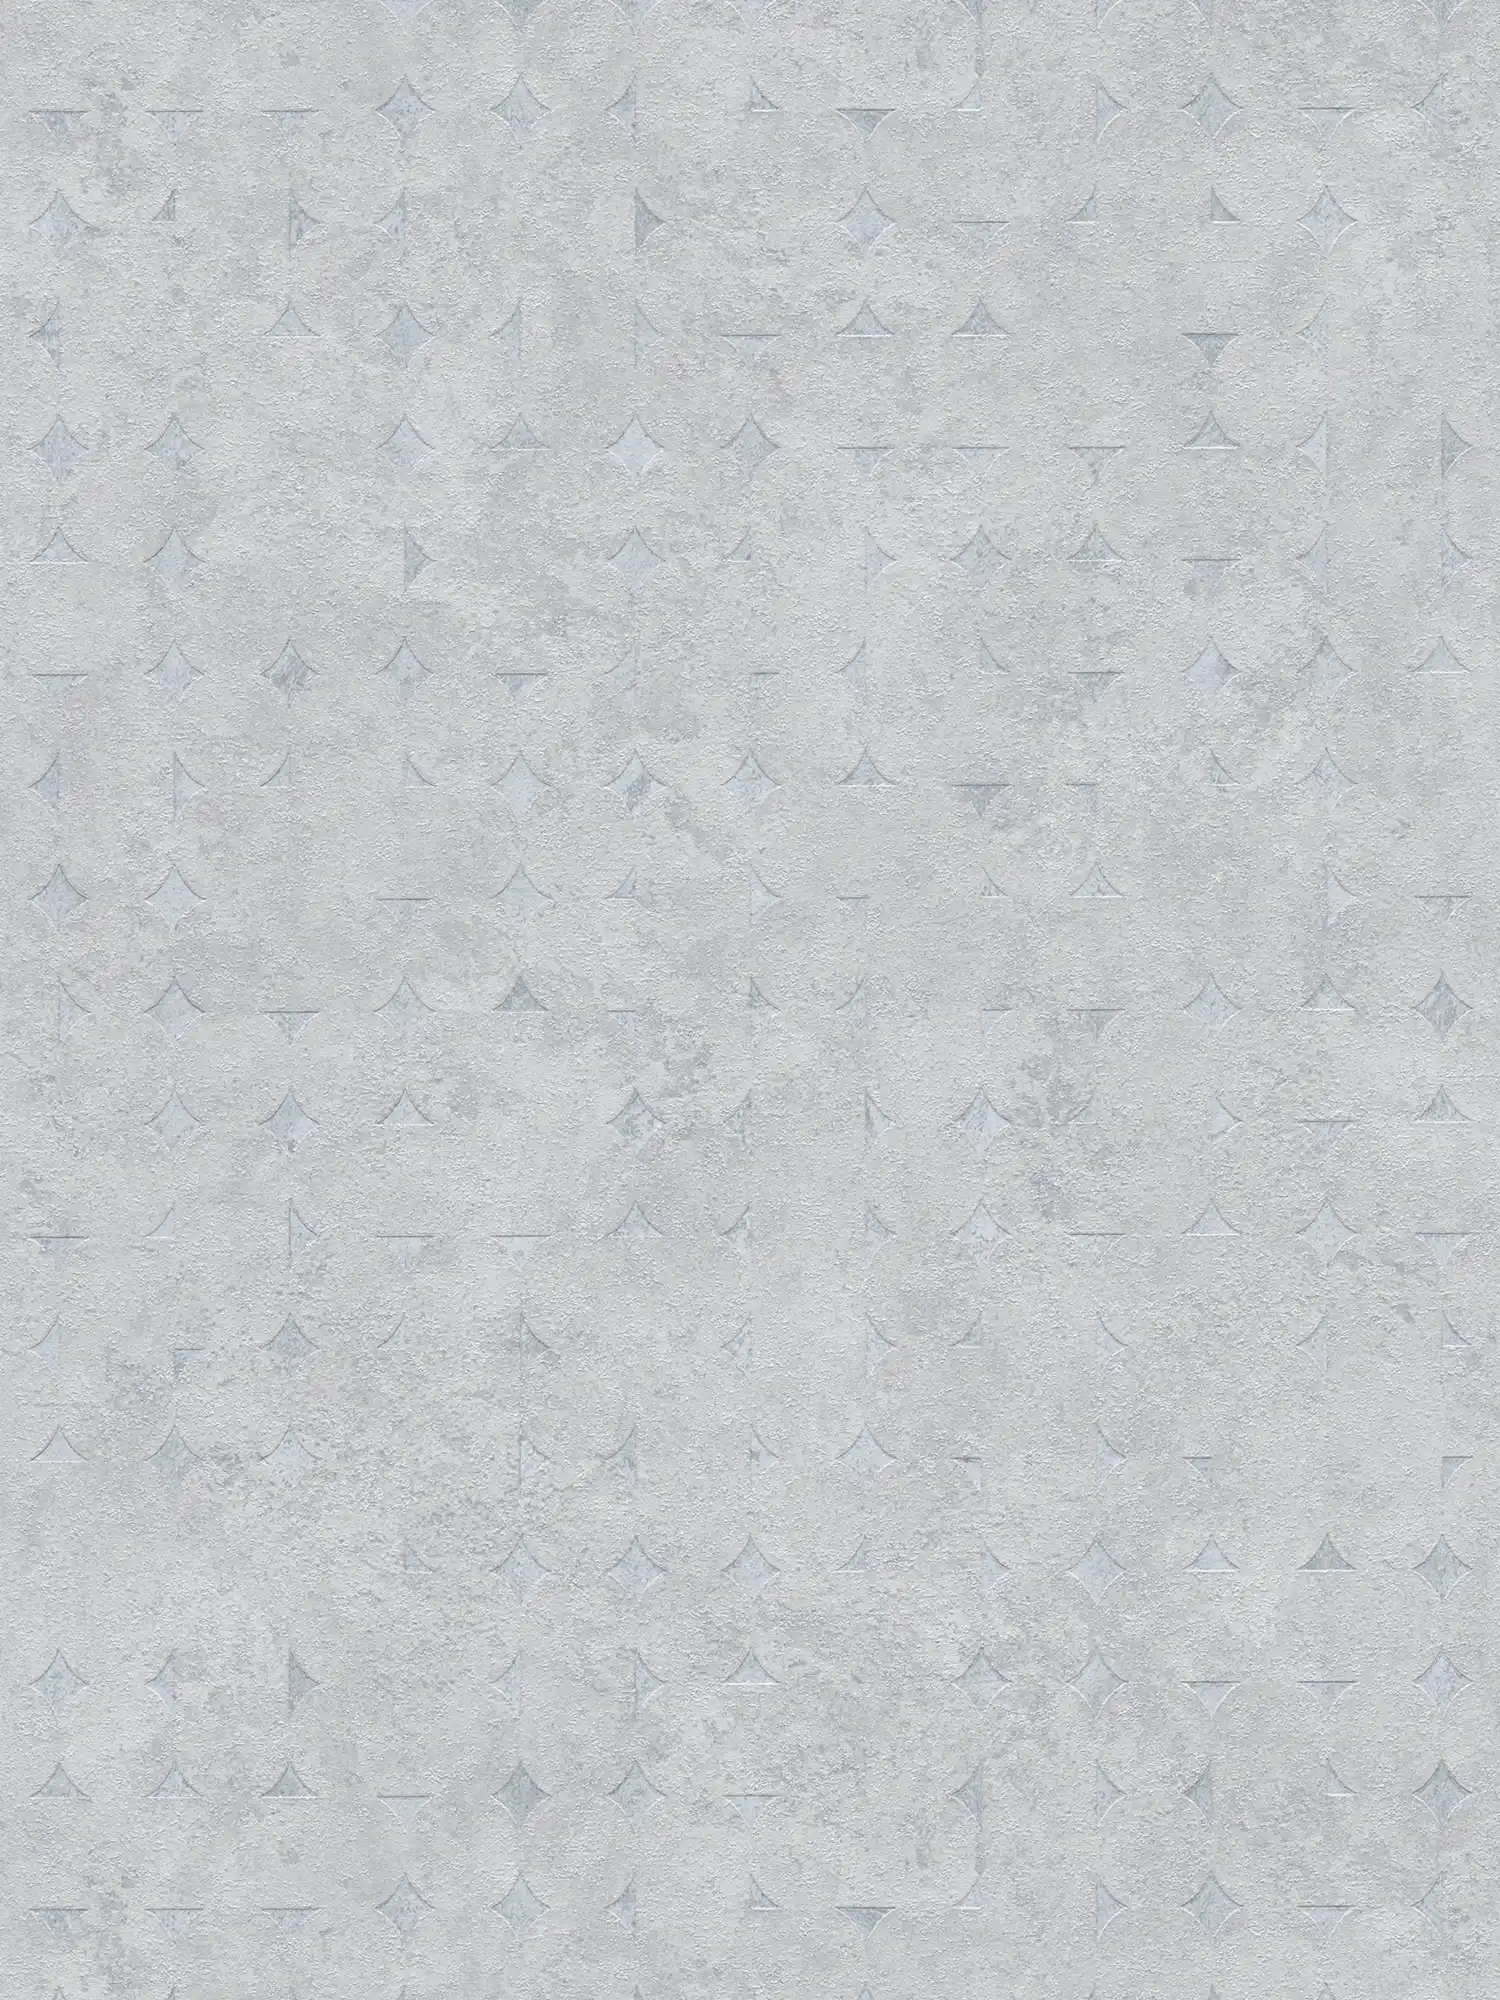 Non-woven wallpaper with geometric shapes and shiny accents - light grey, silver
